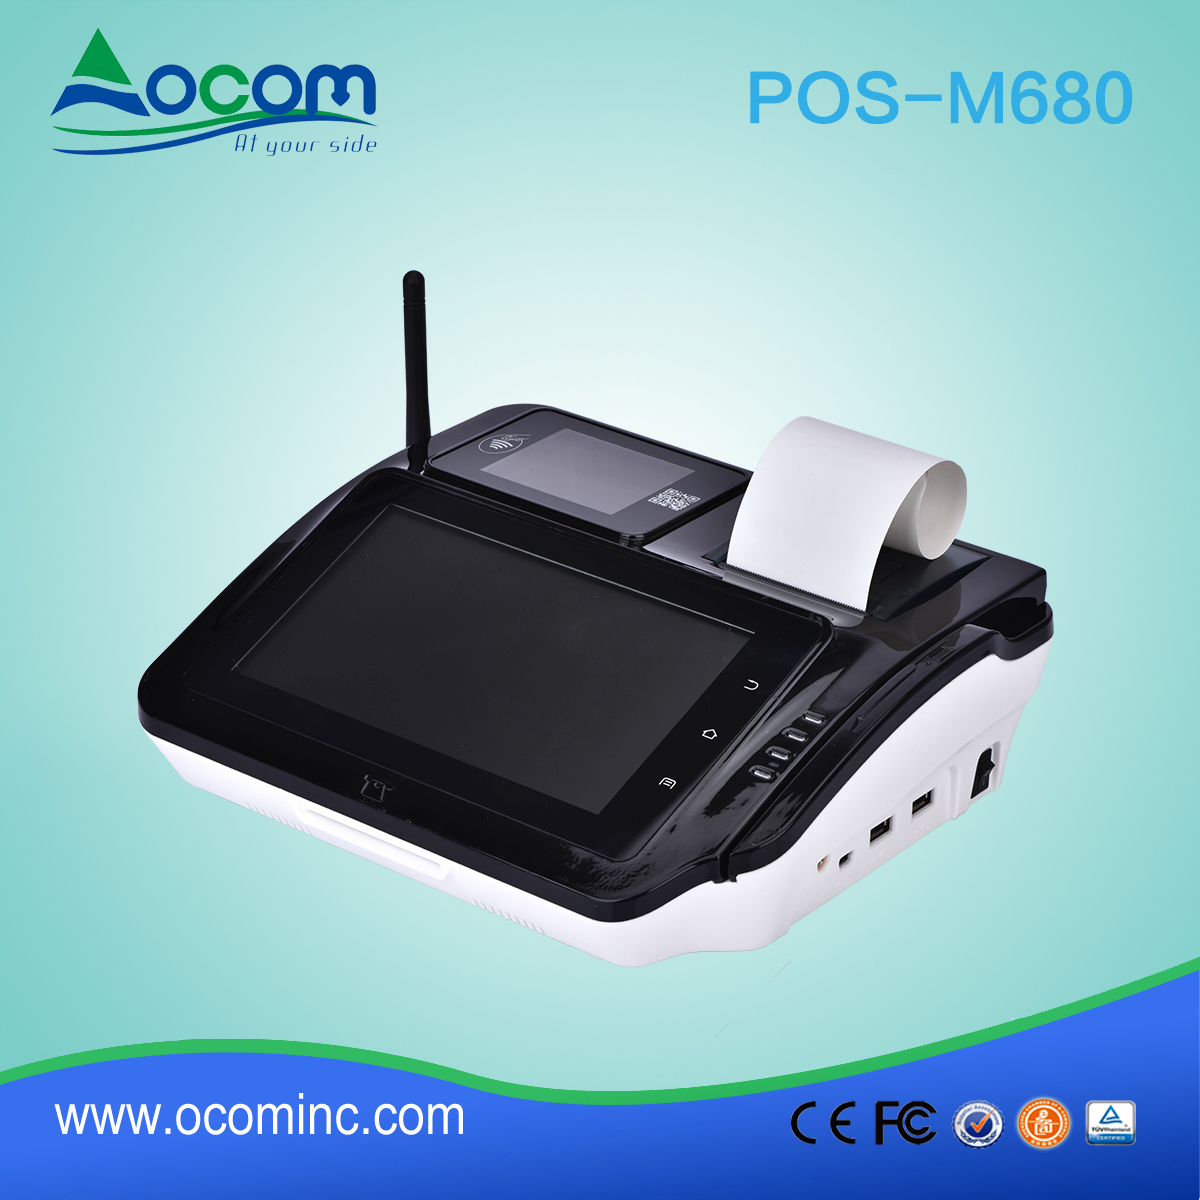 POS-M680 POS Terminal with Barcode NFC Card Reader and 58mm Printer